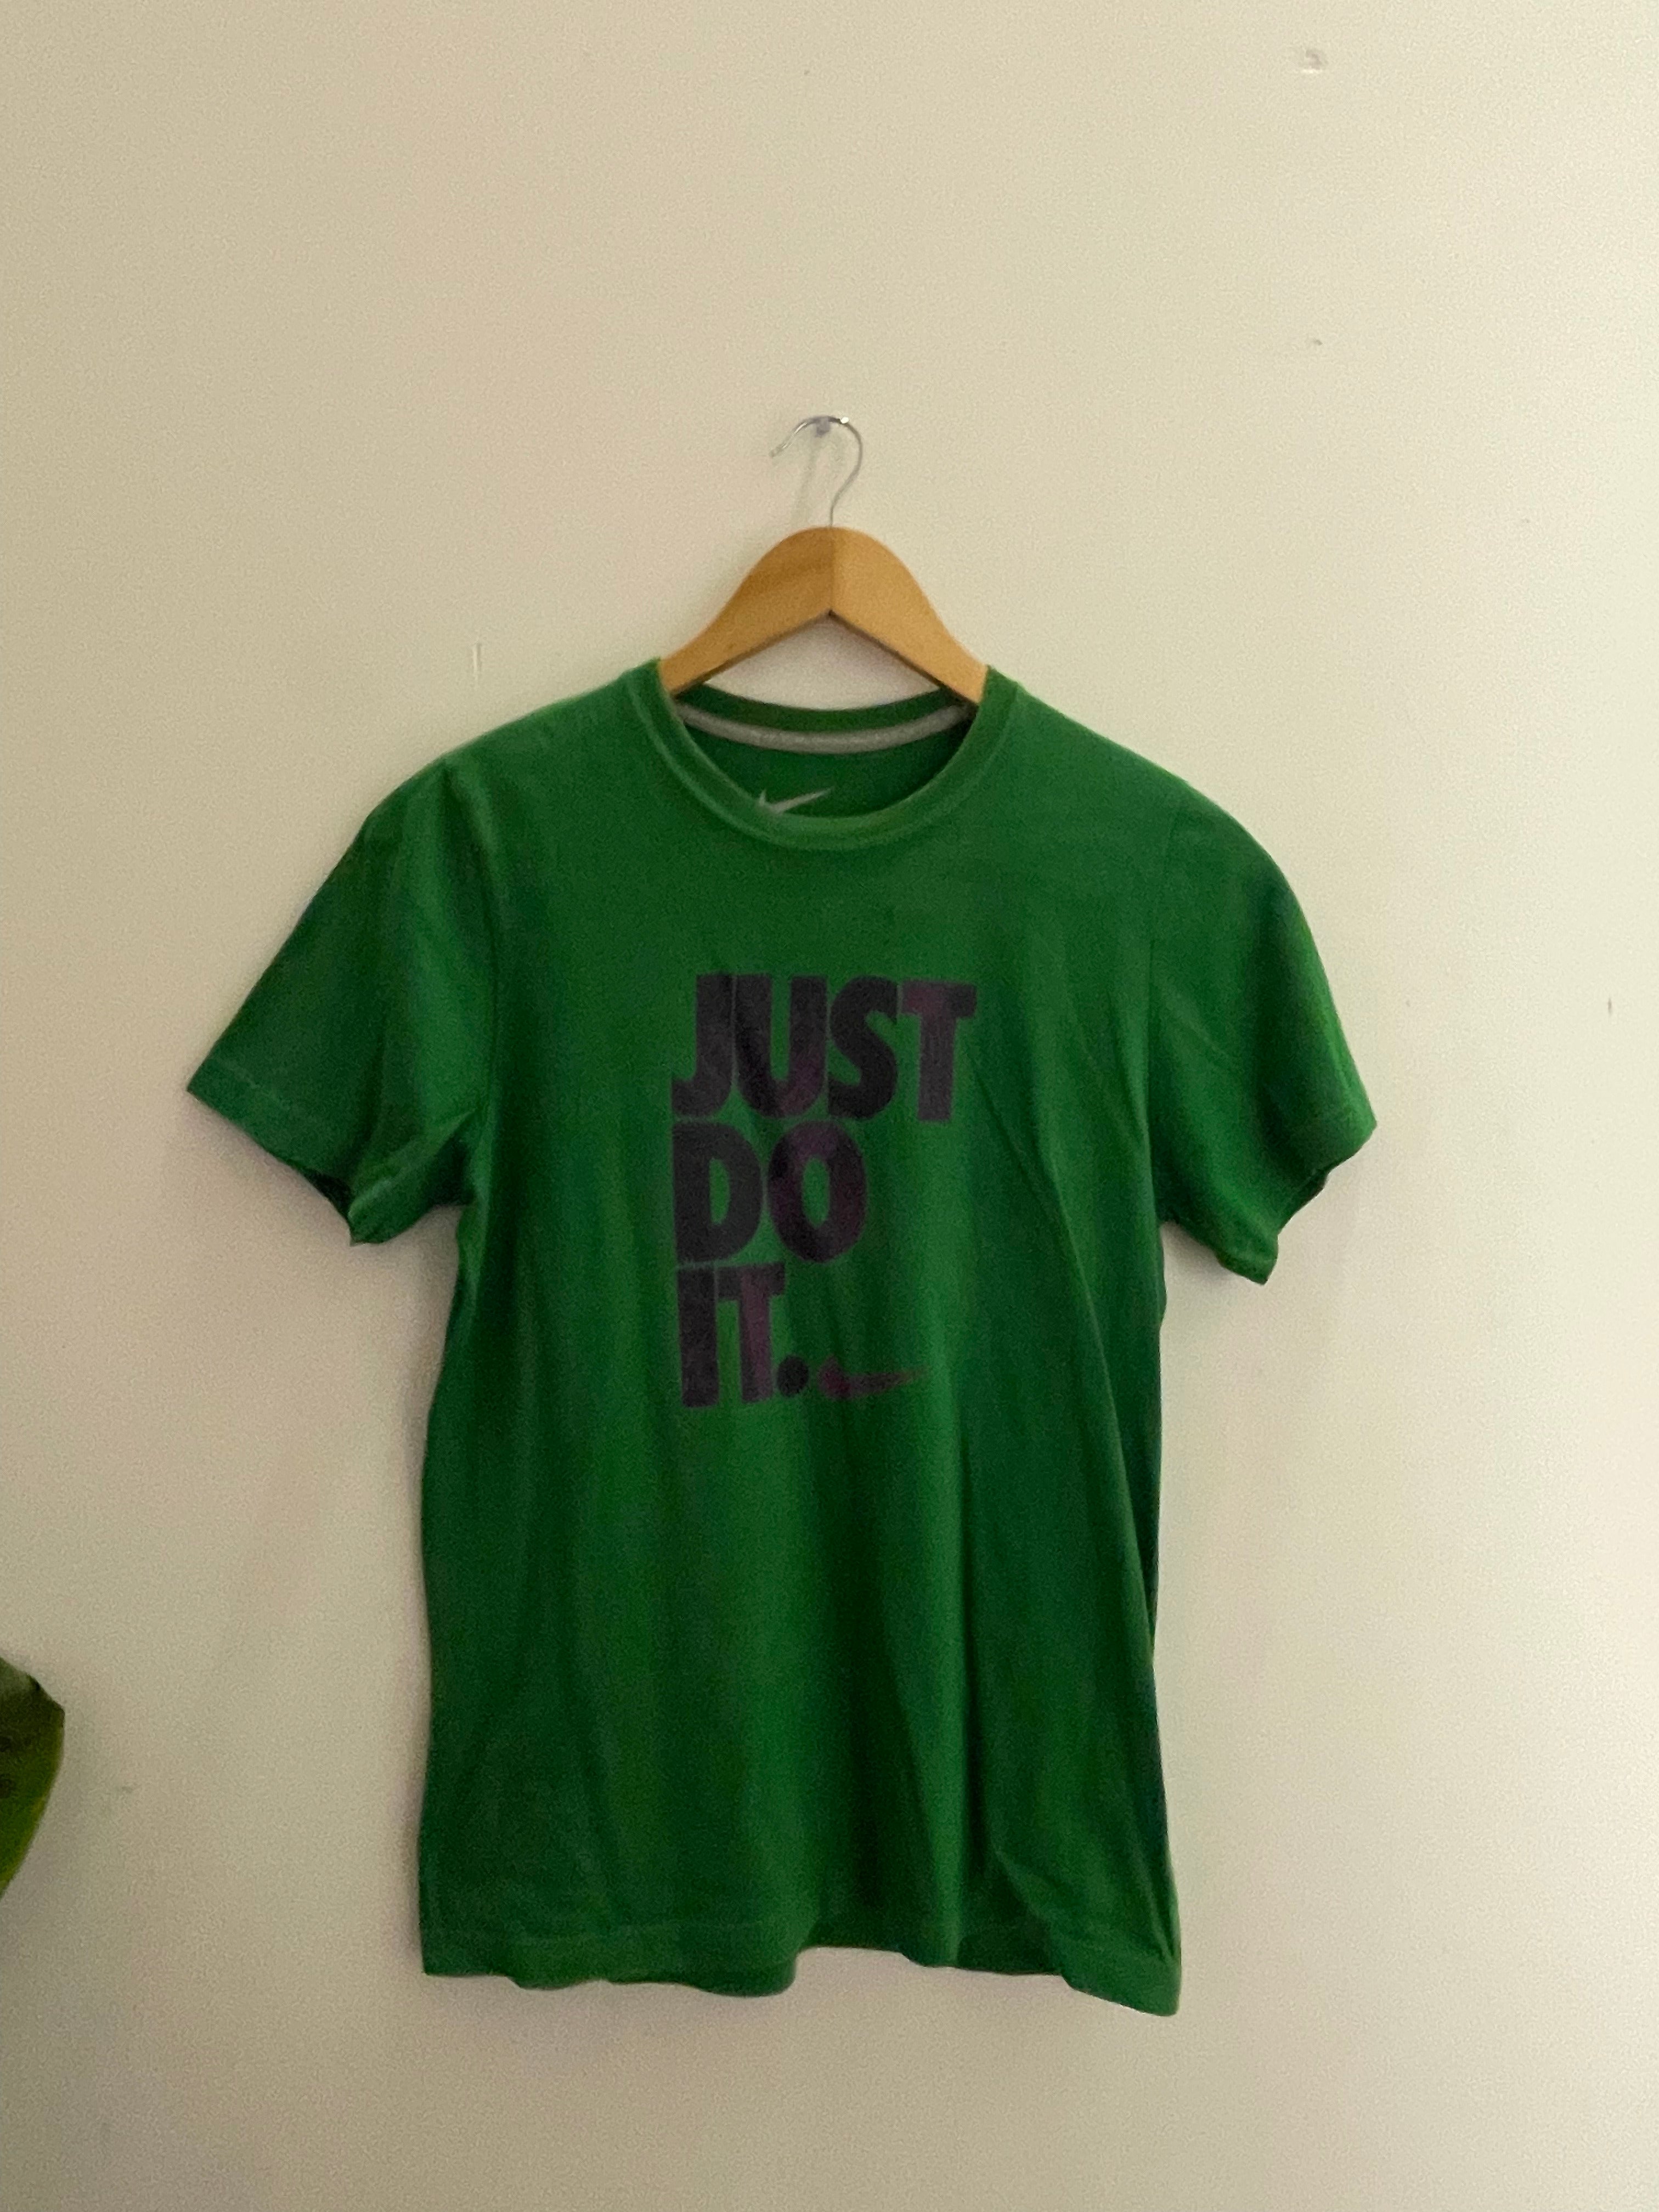 Vintage Nike just do it graphics large green tshirt